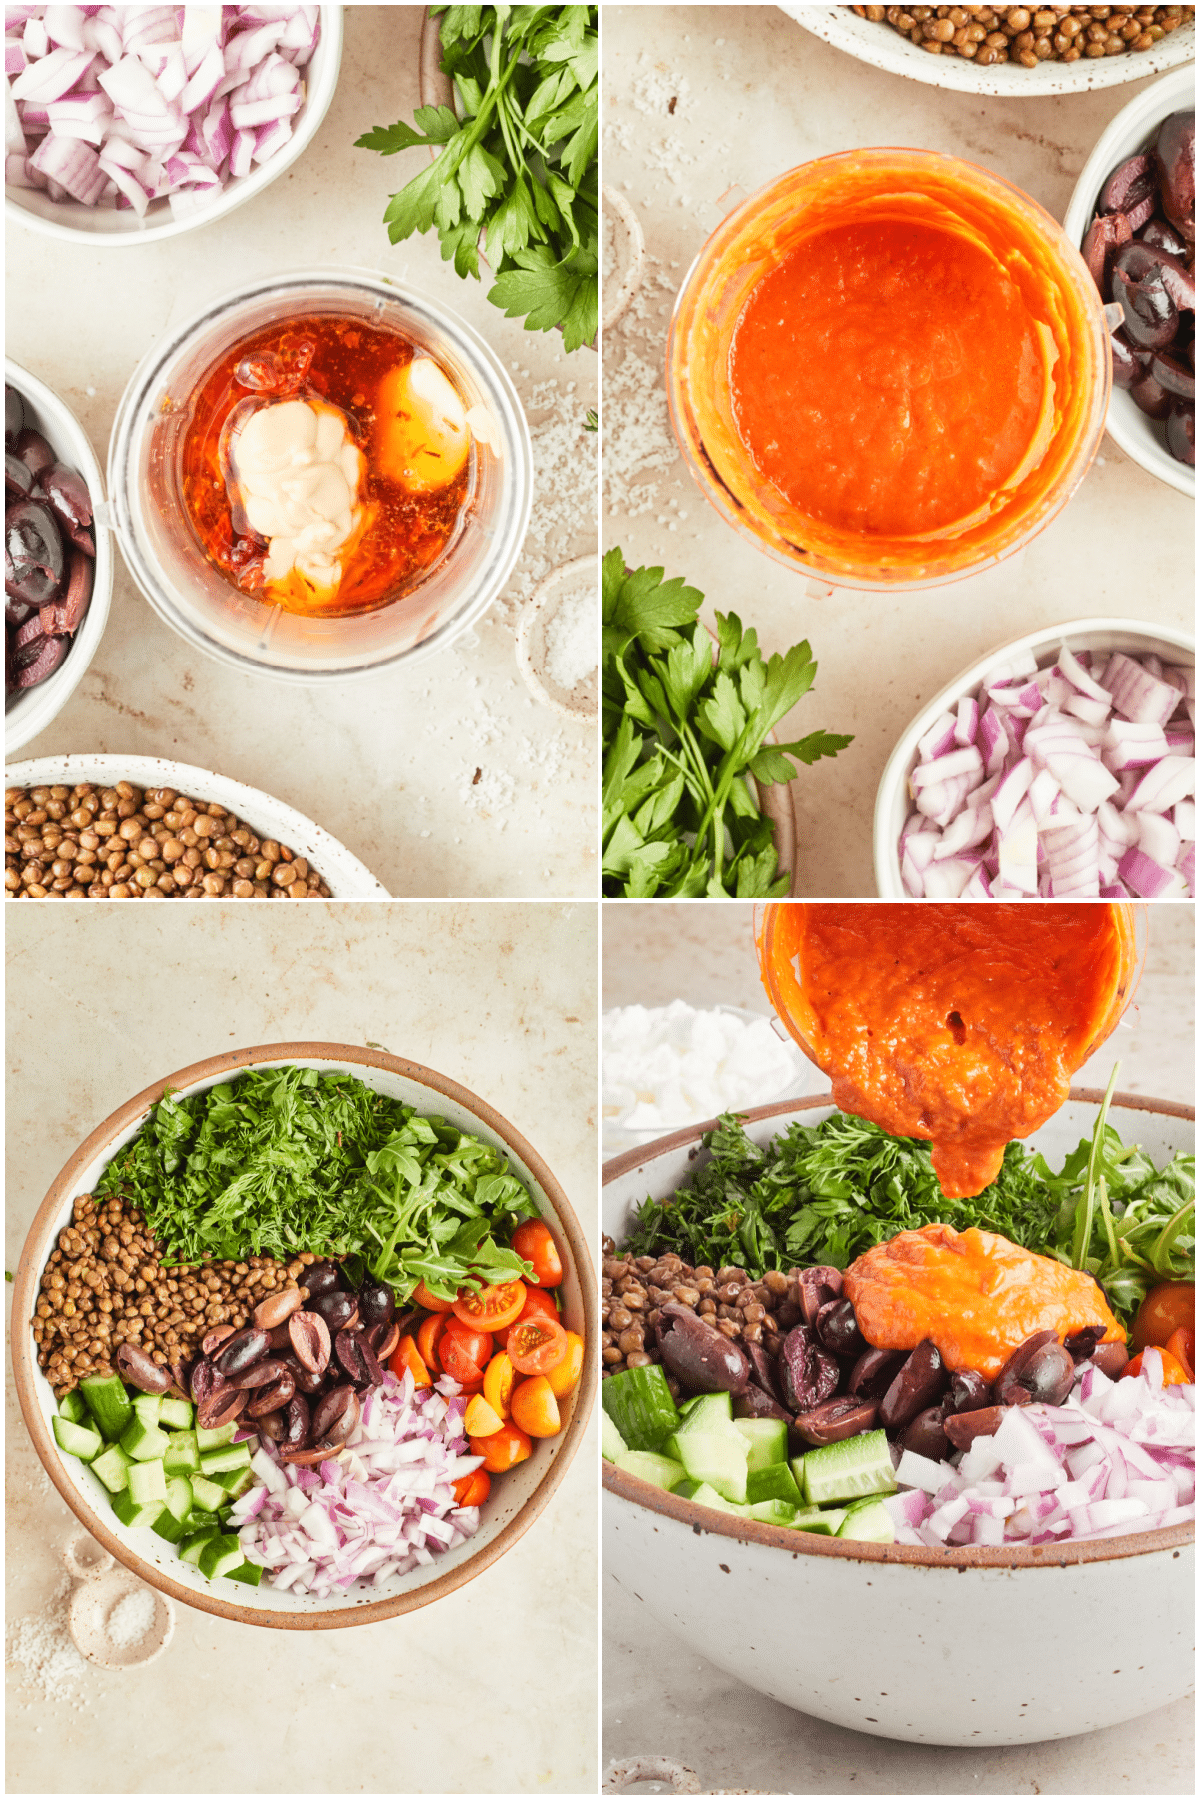 A four image collage showing how to make a Mediterranean lentil salad: combine the ingredients for the sun dried tomato dressing, blend dressing, pour over the bowl of separated salad ingredients, stir to combine.